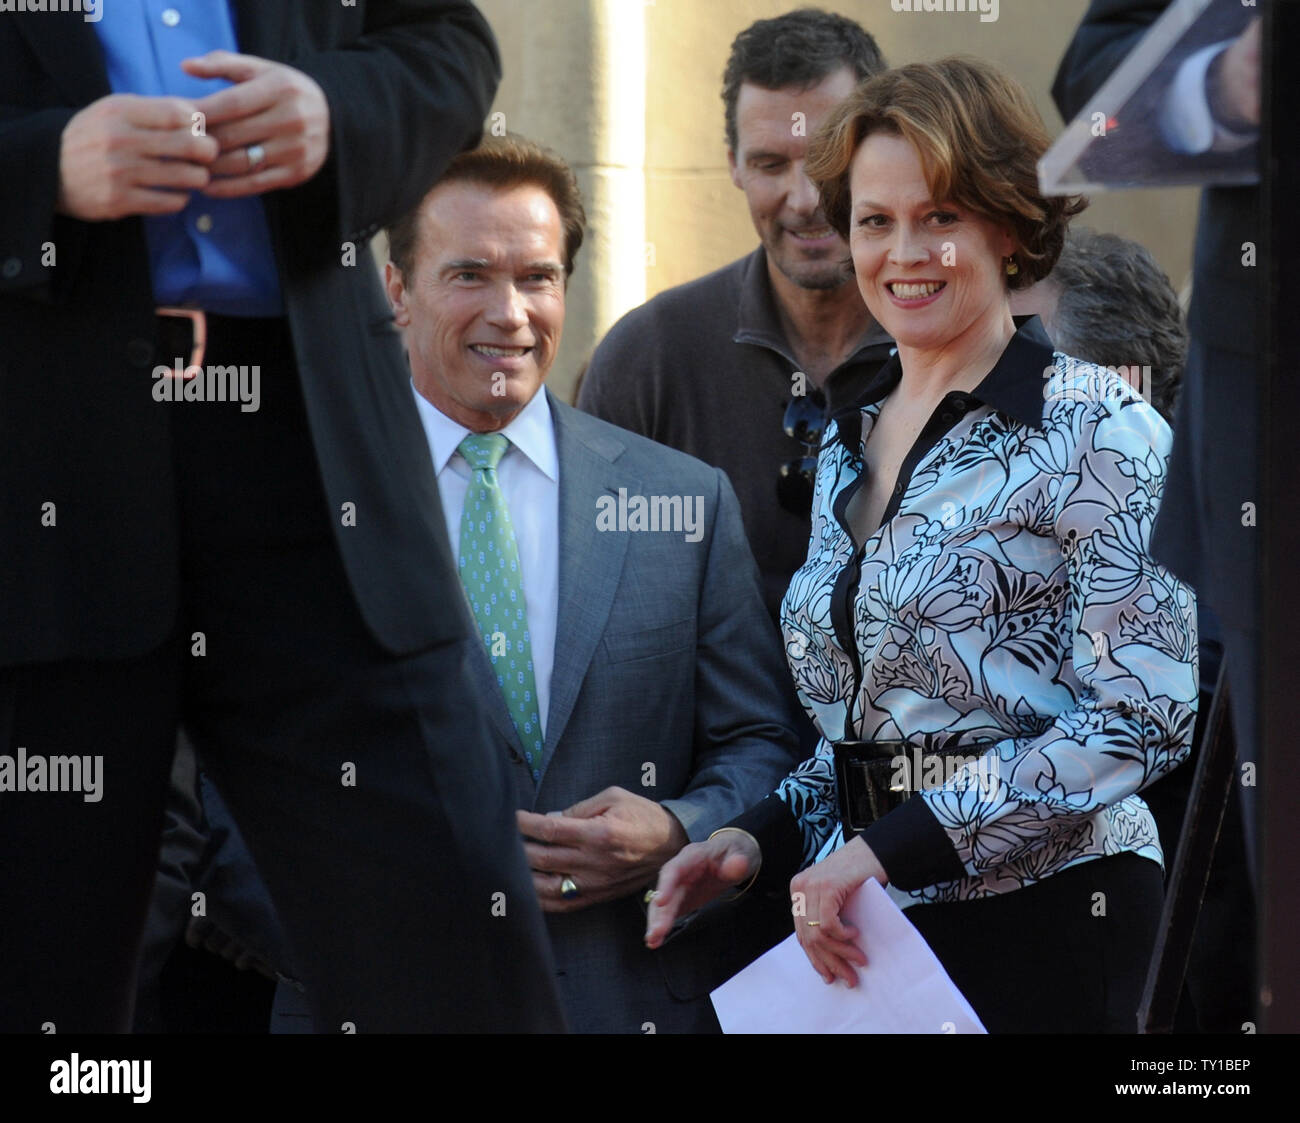 Actress Sigourney Weaver (L) and California Gov. Arnold Schwarzenegger wait to speak at the podium before director James Cameron was awarded a star on the Hollywood Walk of Fame in Los Angeles on December 18, 2009. Schwarzenegger starred in Cameron's 'Terminator' movies and Weaver was a cast member in his films 'Aliens' and the new 'Avatar'.      UPI/Jim Ruymen Stock Photo